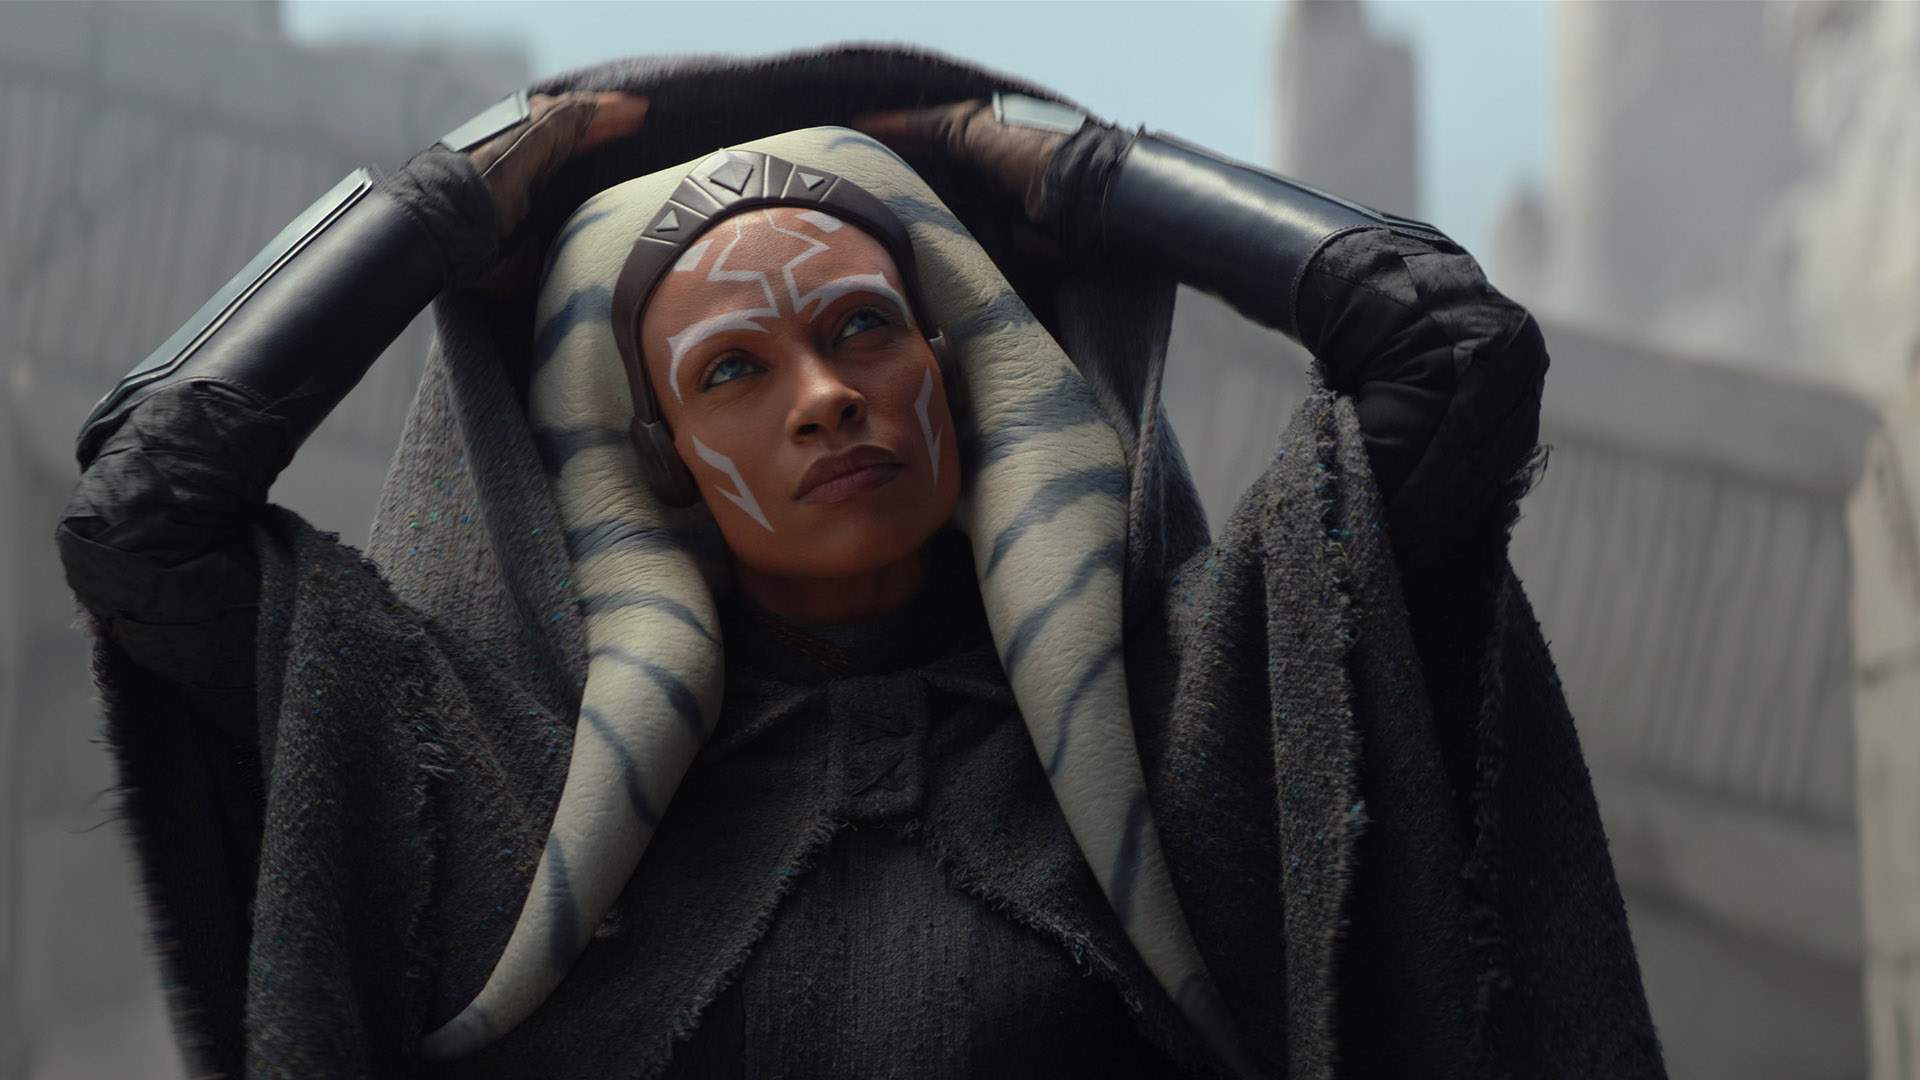 New 'Star Wars' Series 'Ahsoka' Chooses Wisely in Making Rosario Dawson Its Formidable On-Screen Force